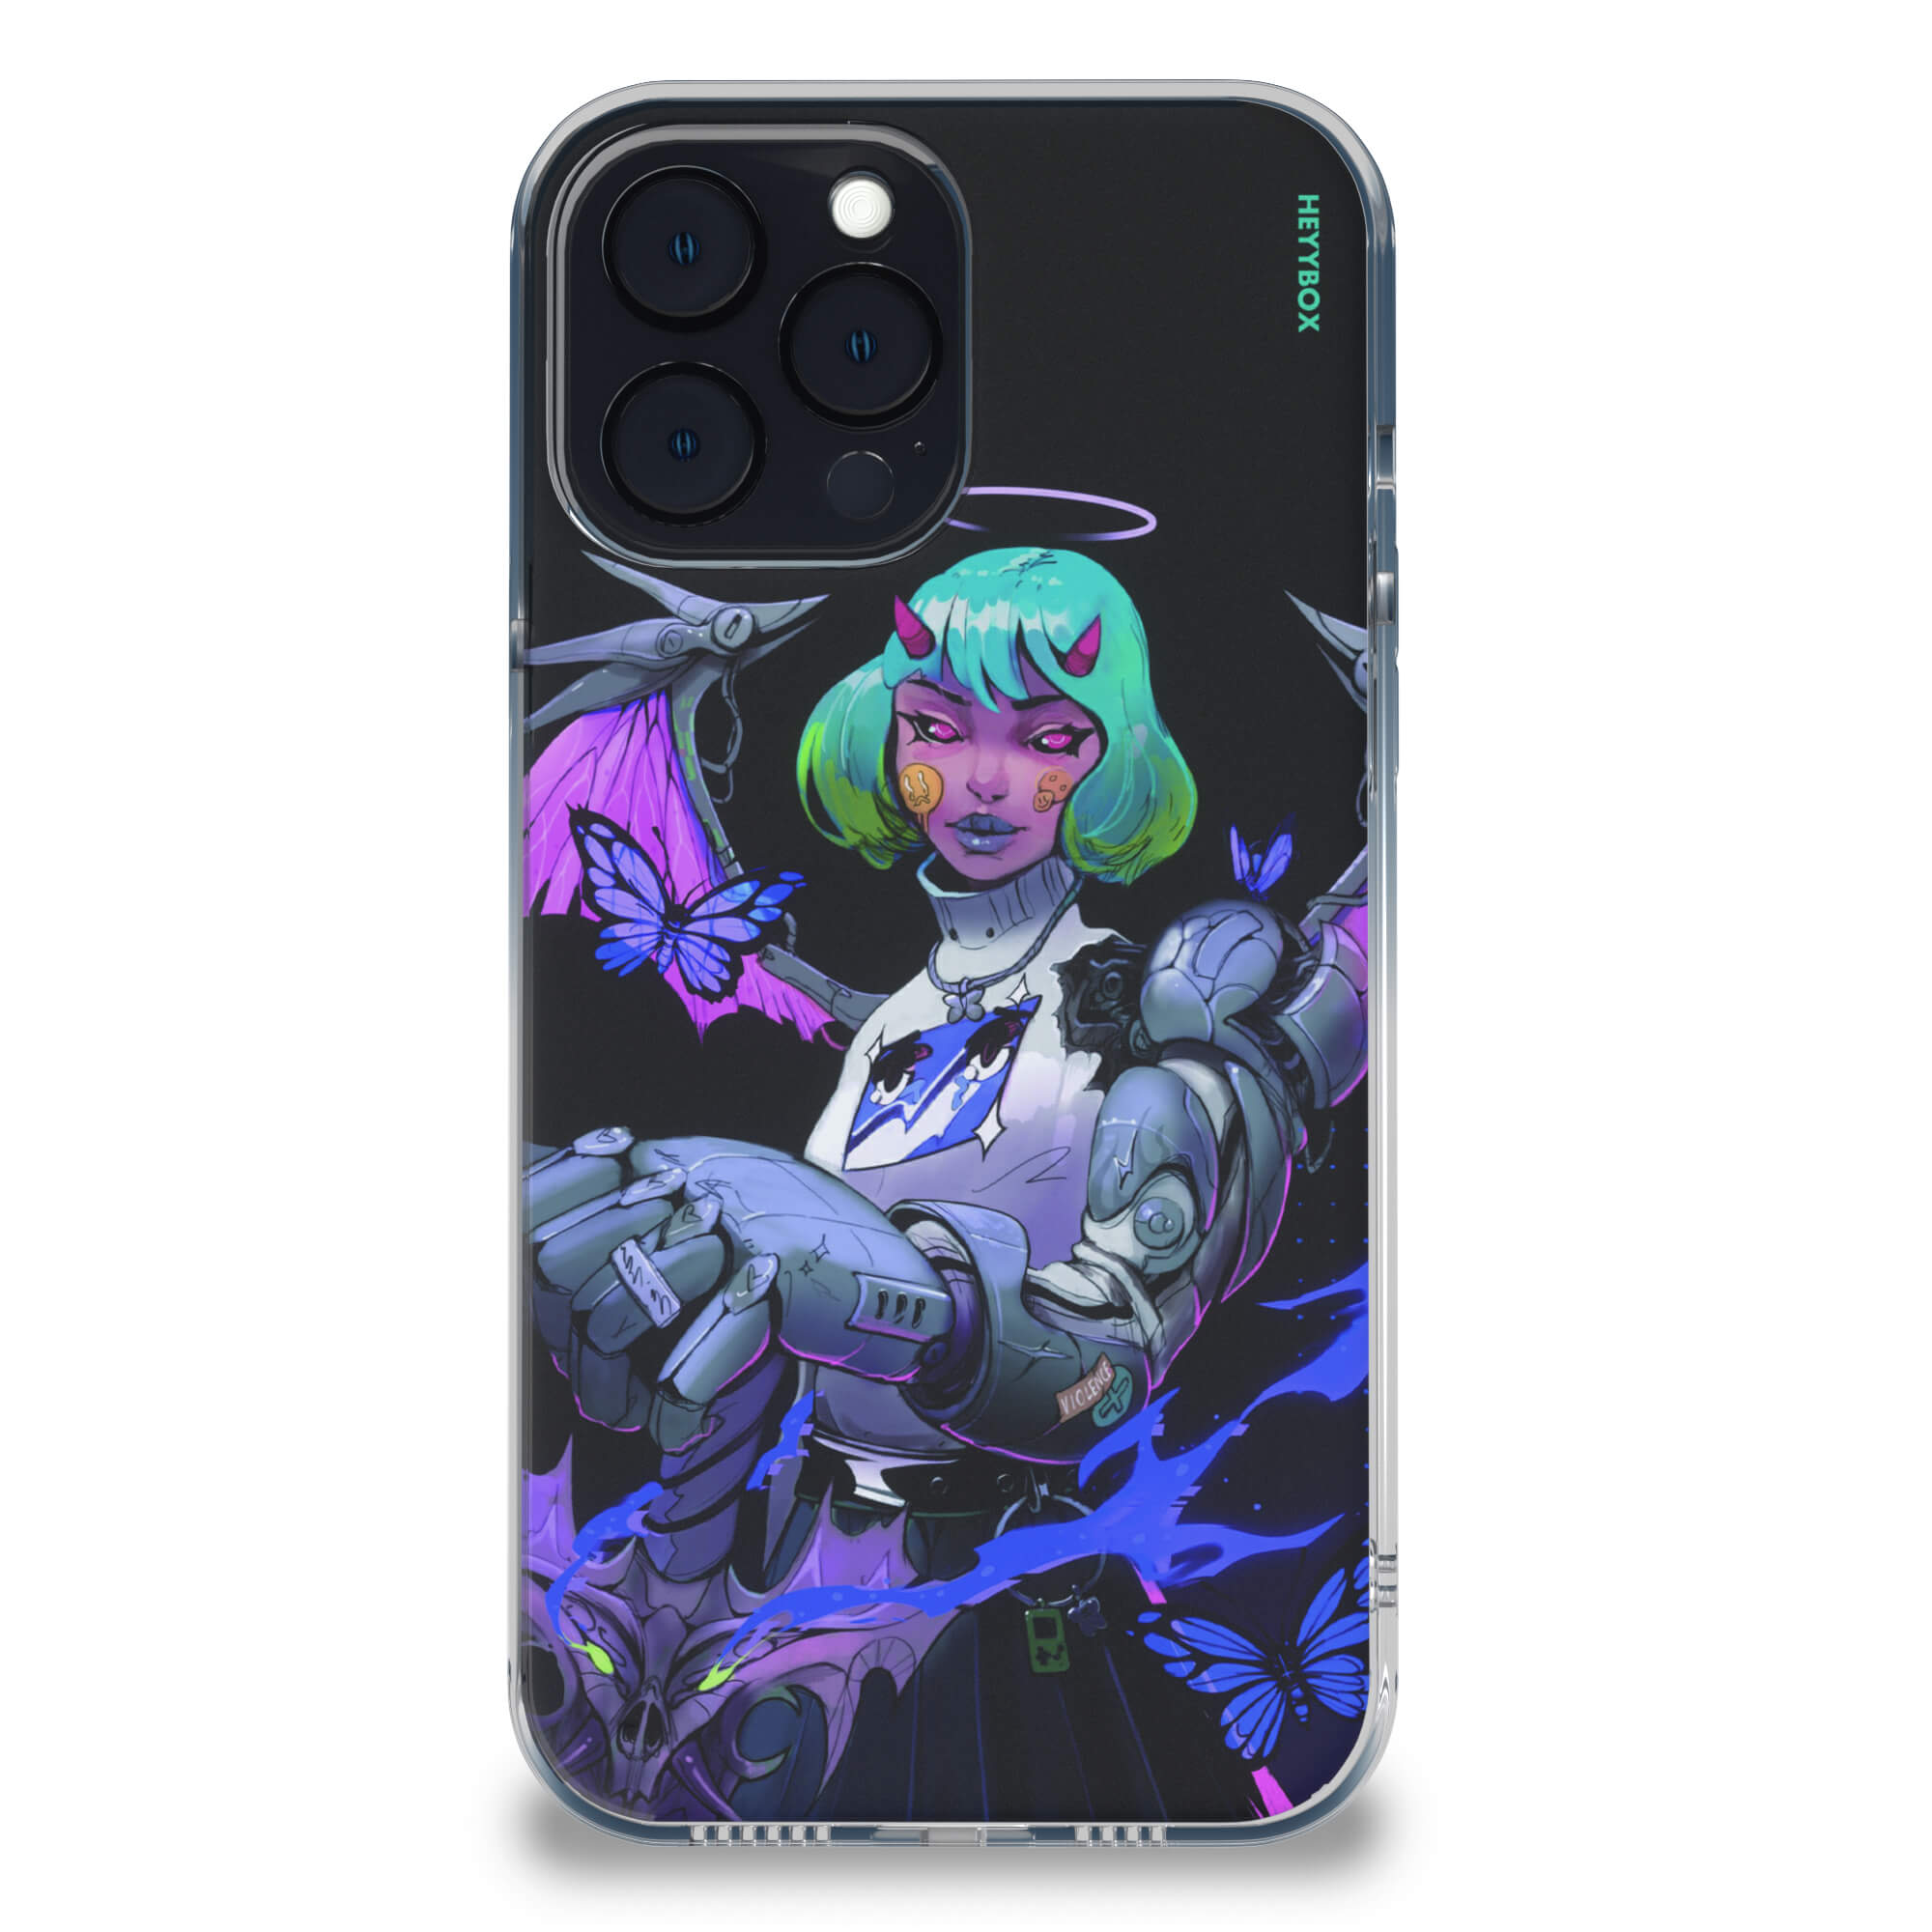 Grimes Inspired RGB Case for iPhone